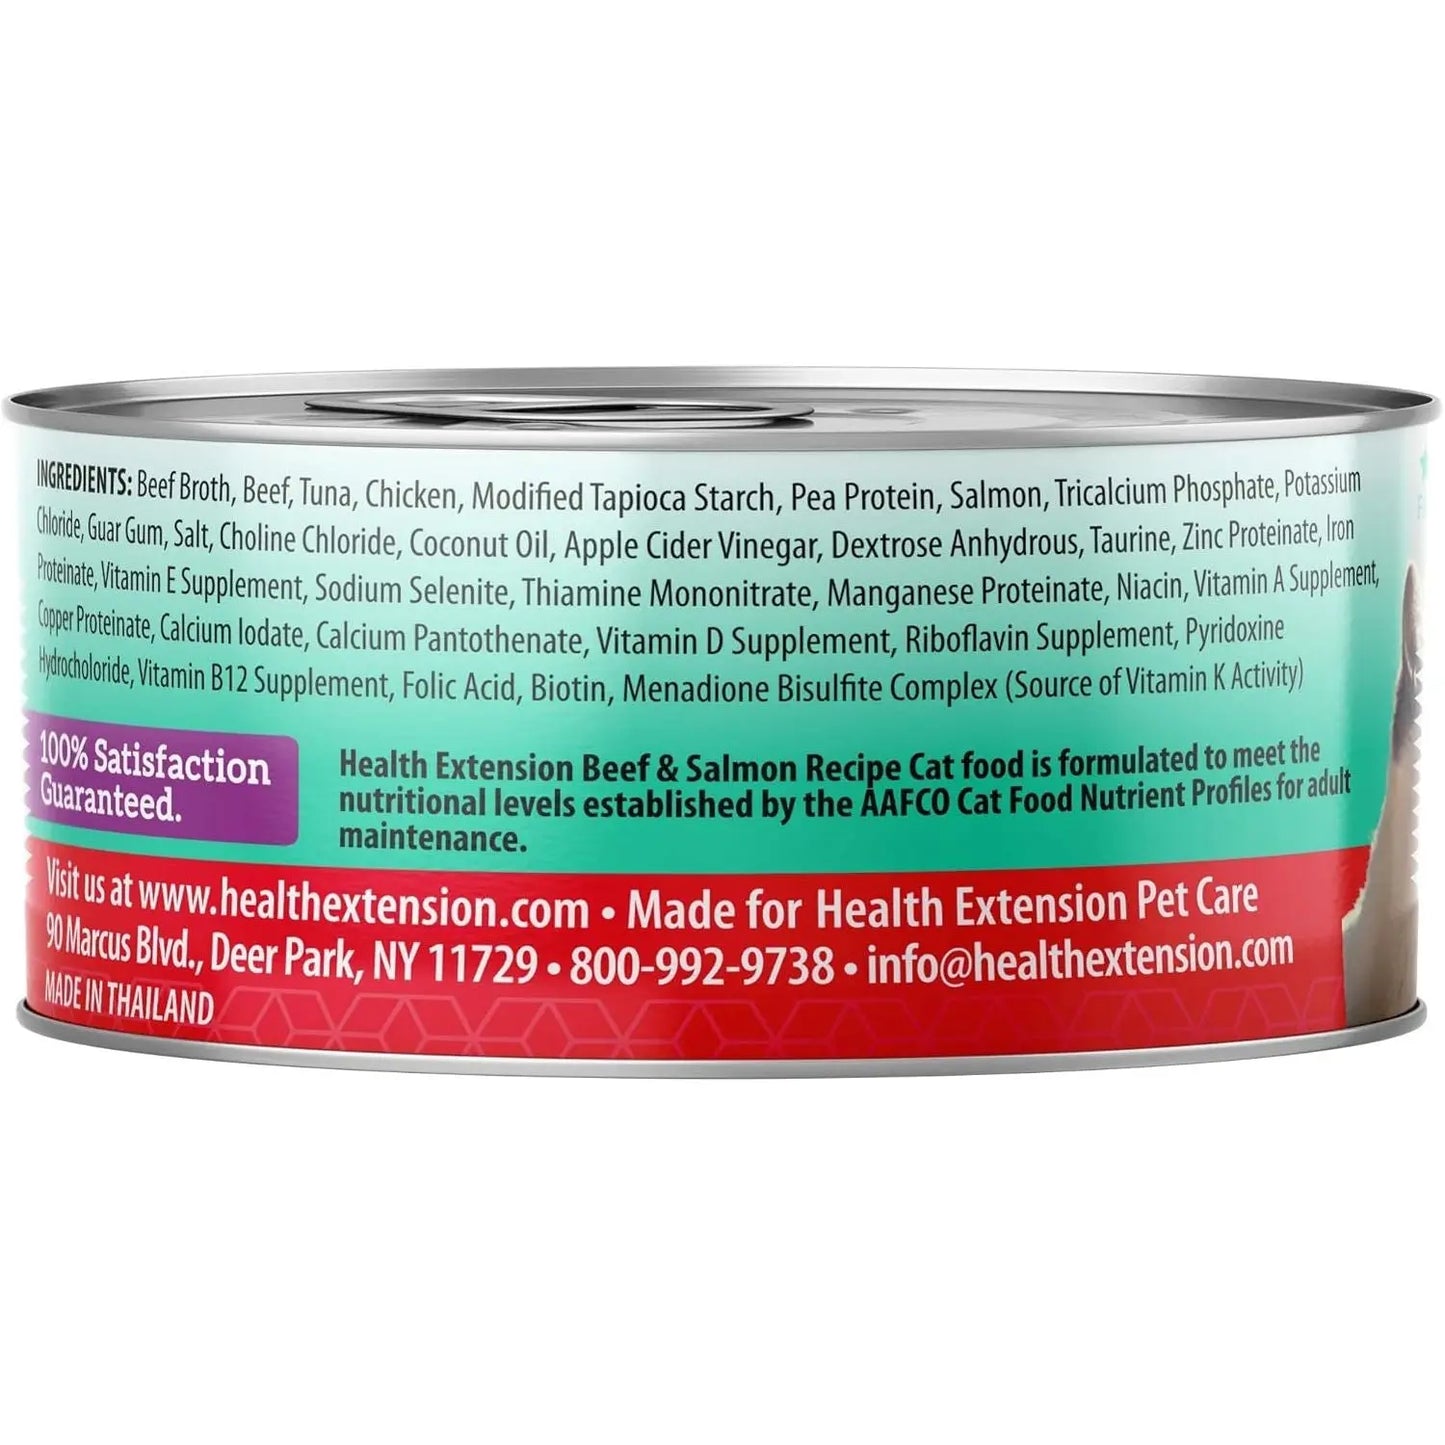 Health Extension Beef & Salmon Grain-Free Wet Cat Food 24 / 2.8 oz Health Extension